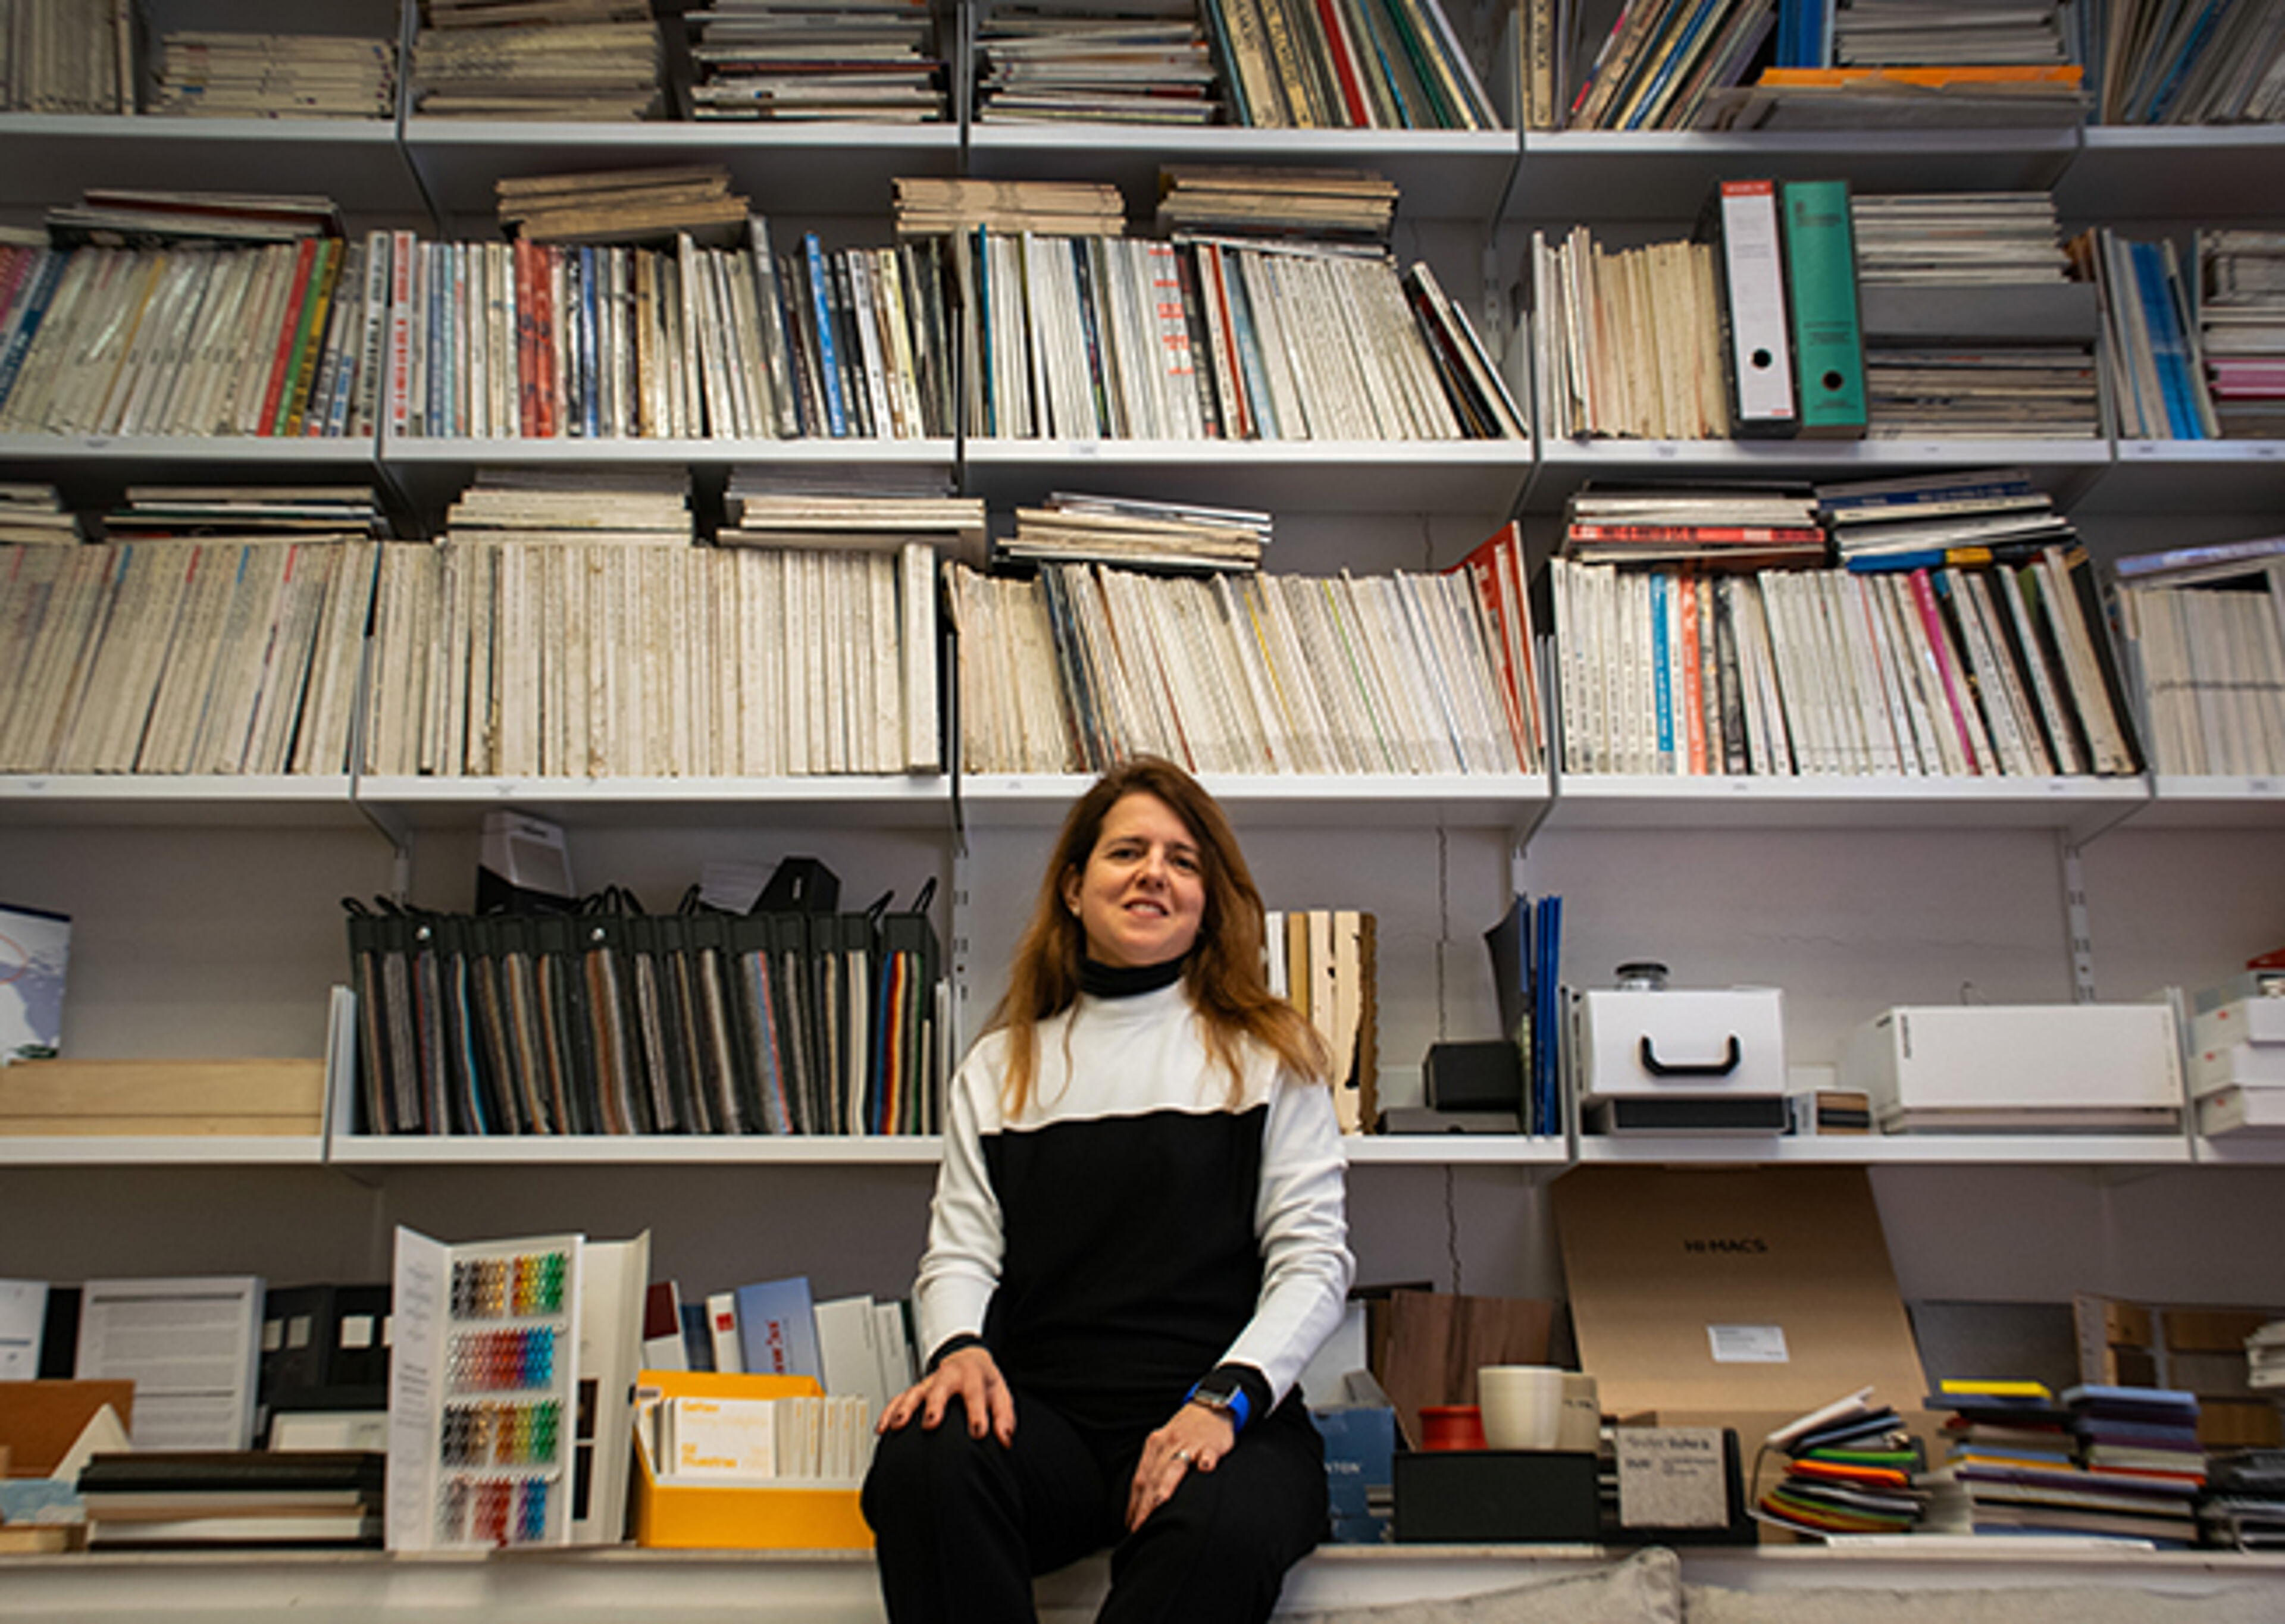 A person sitting in front of a well-stocked bookshelf filled with files and publications in an academic or professional setting.